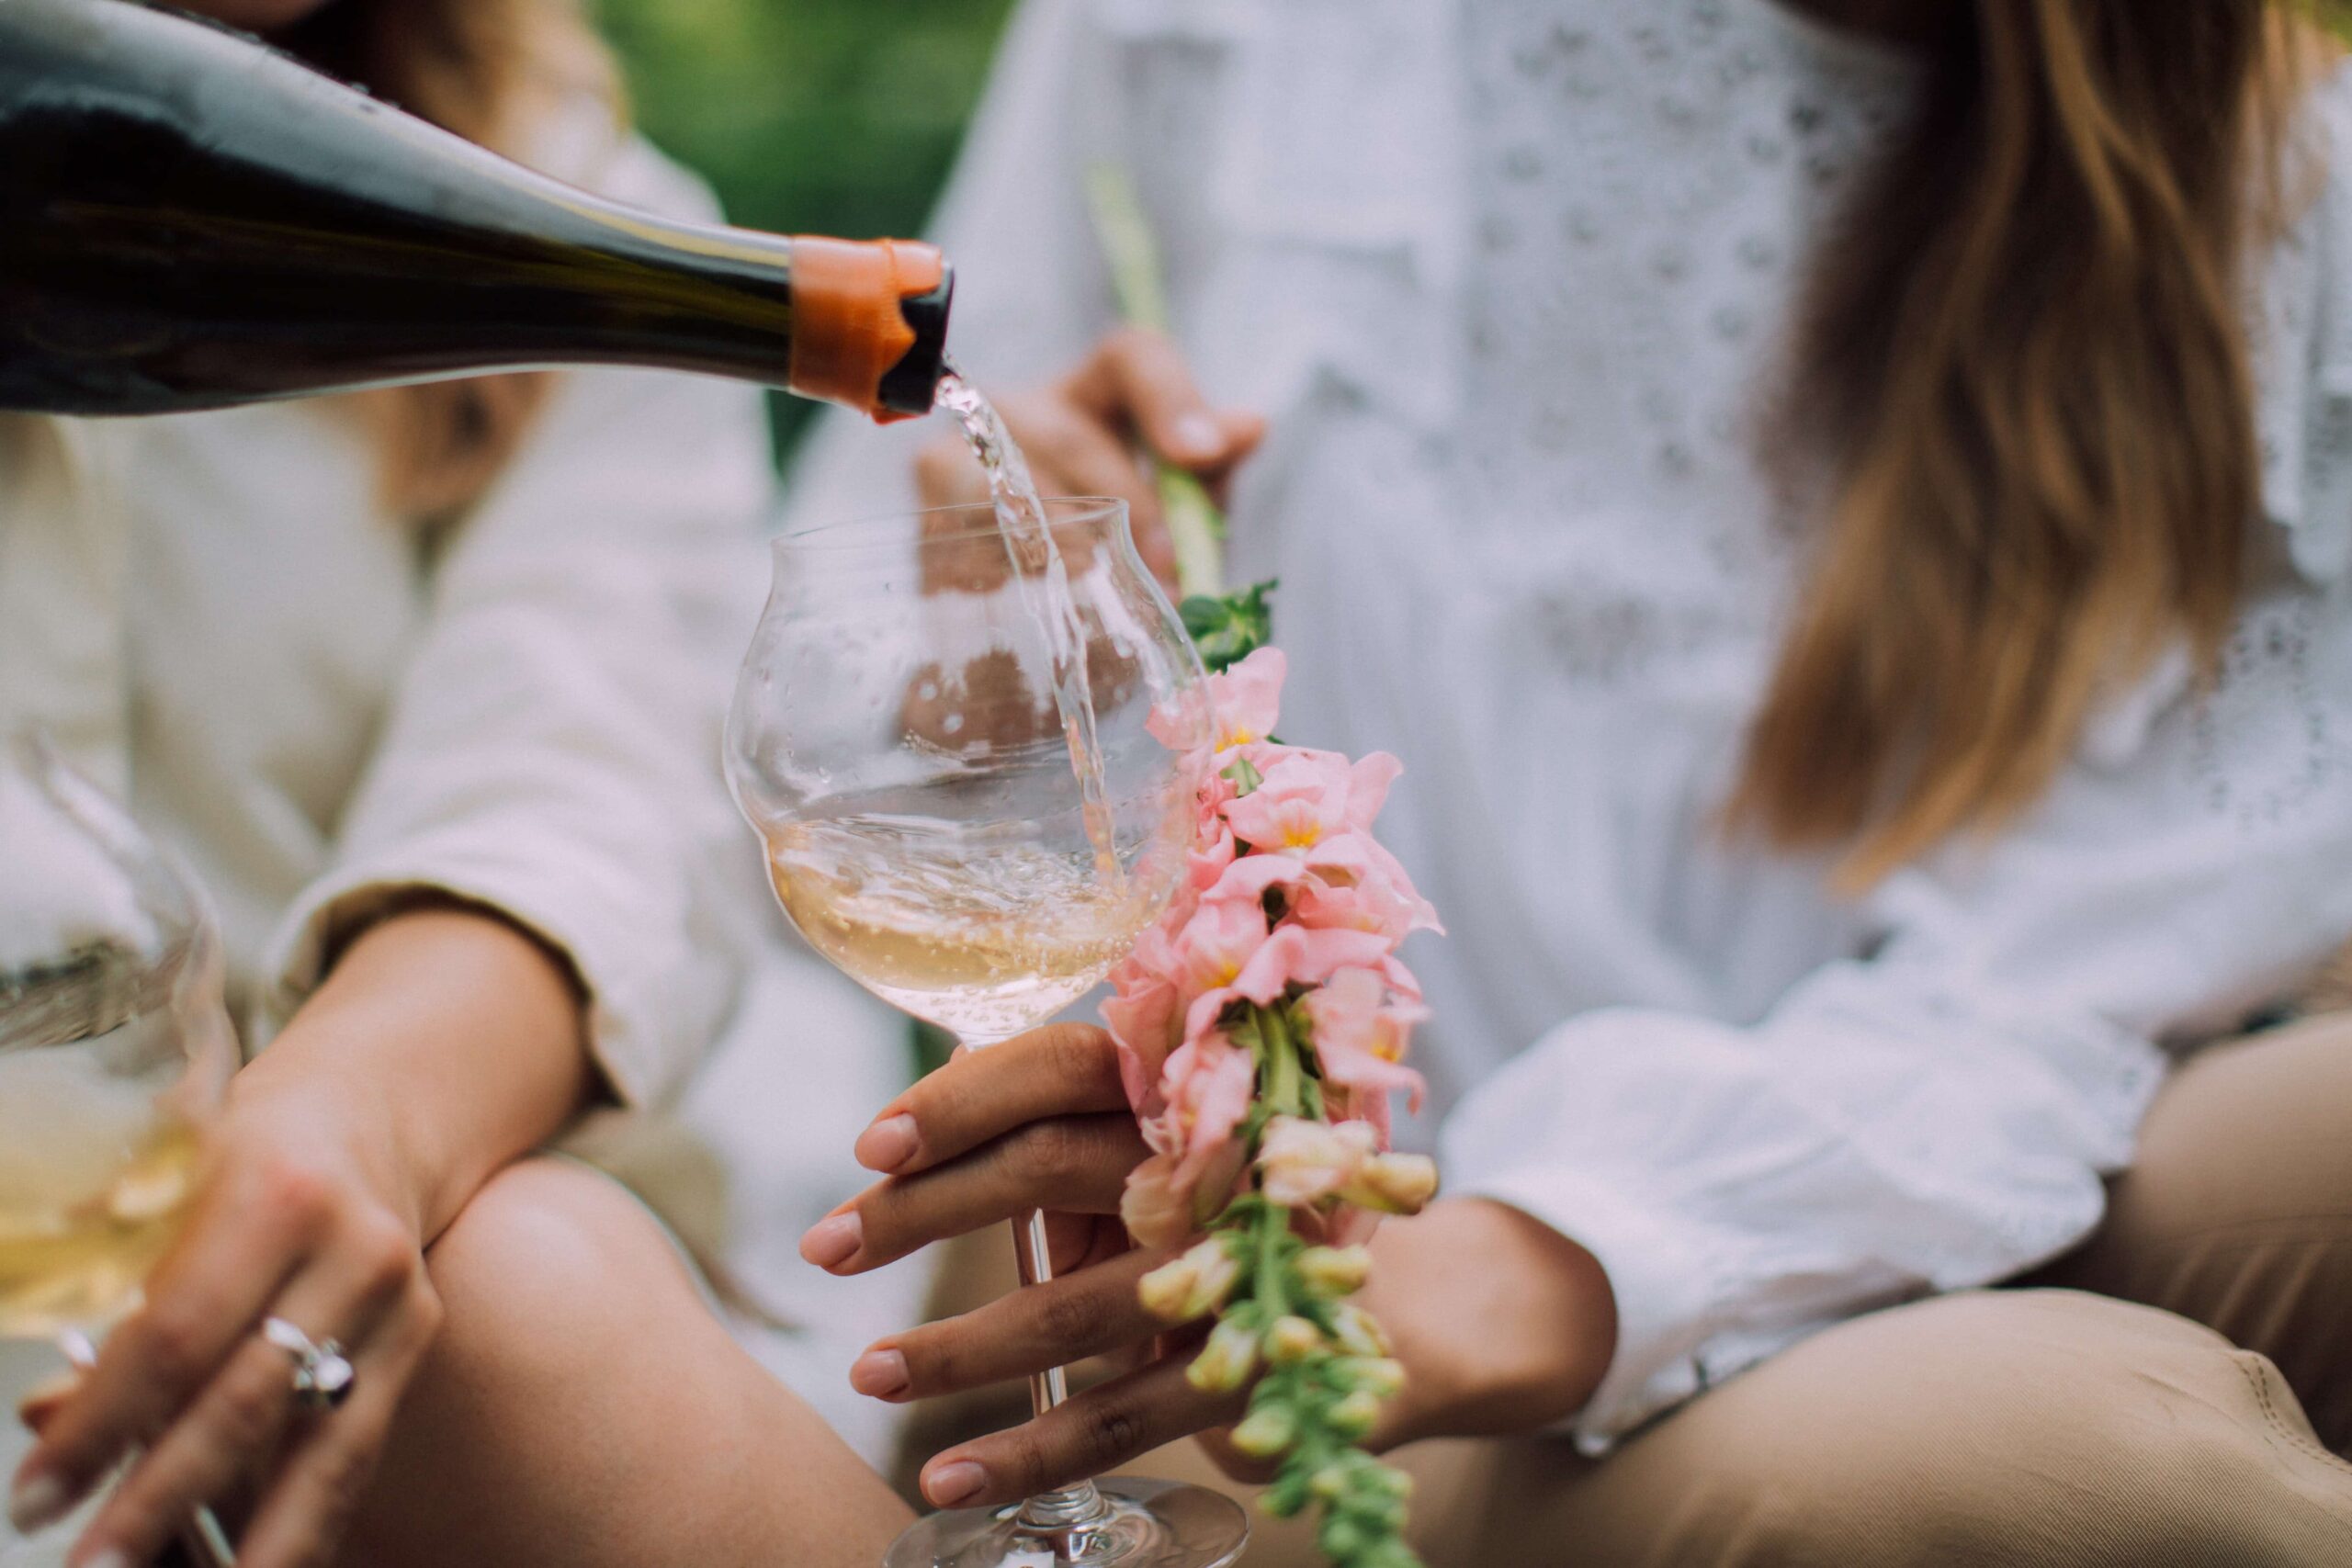 A woman holding flowers and a glass while someone pours her wine.